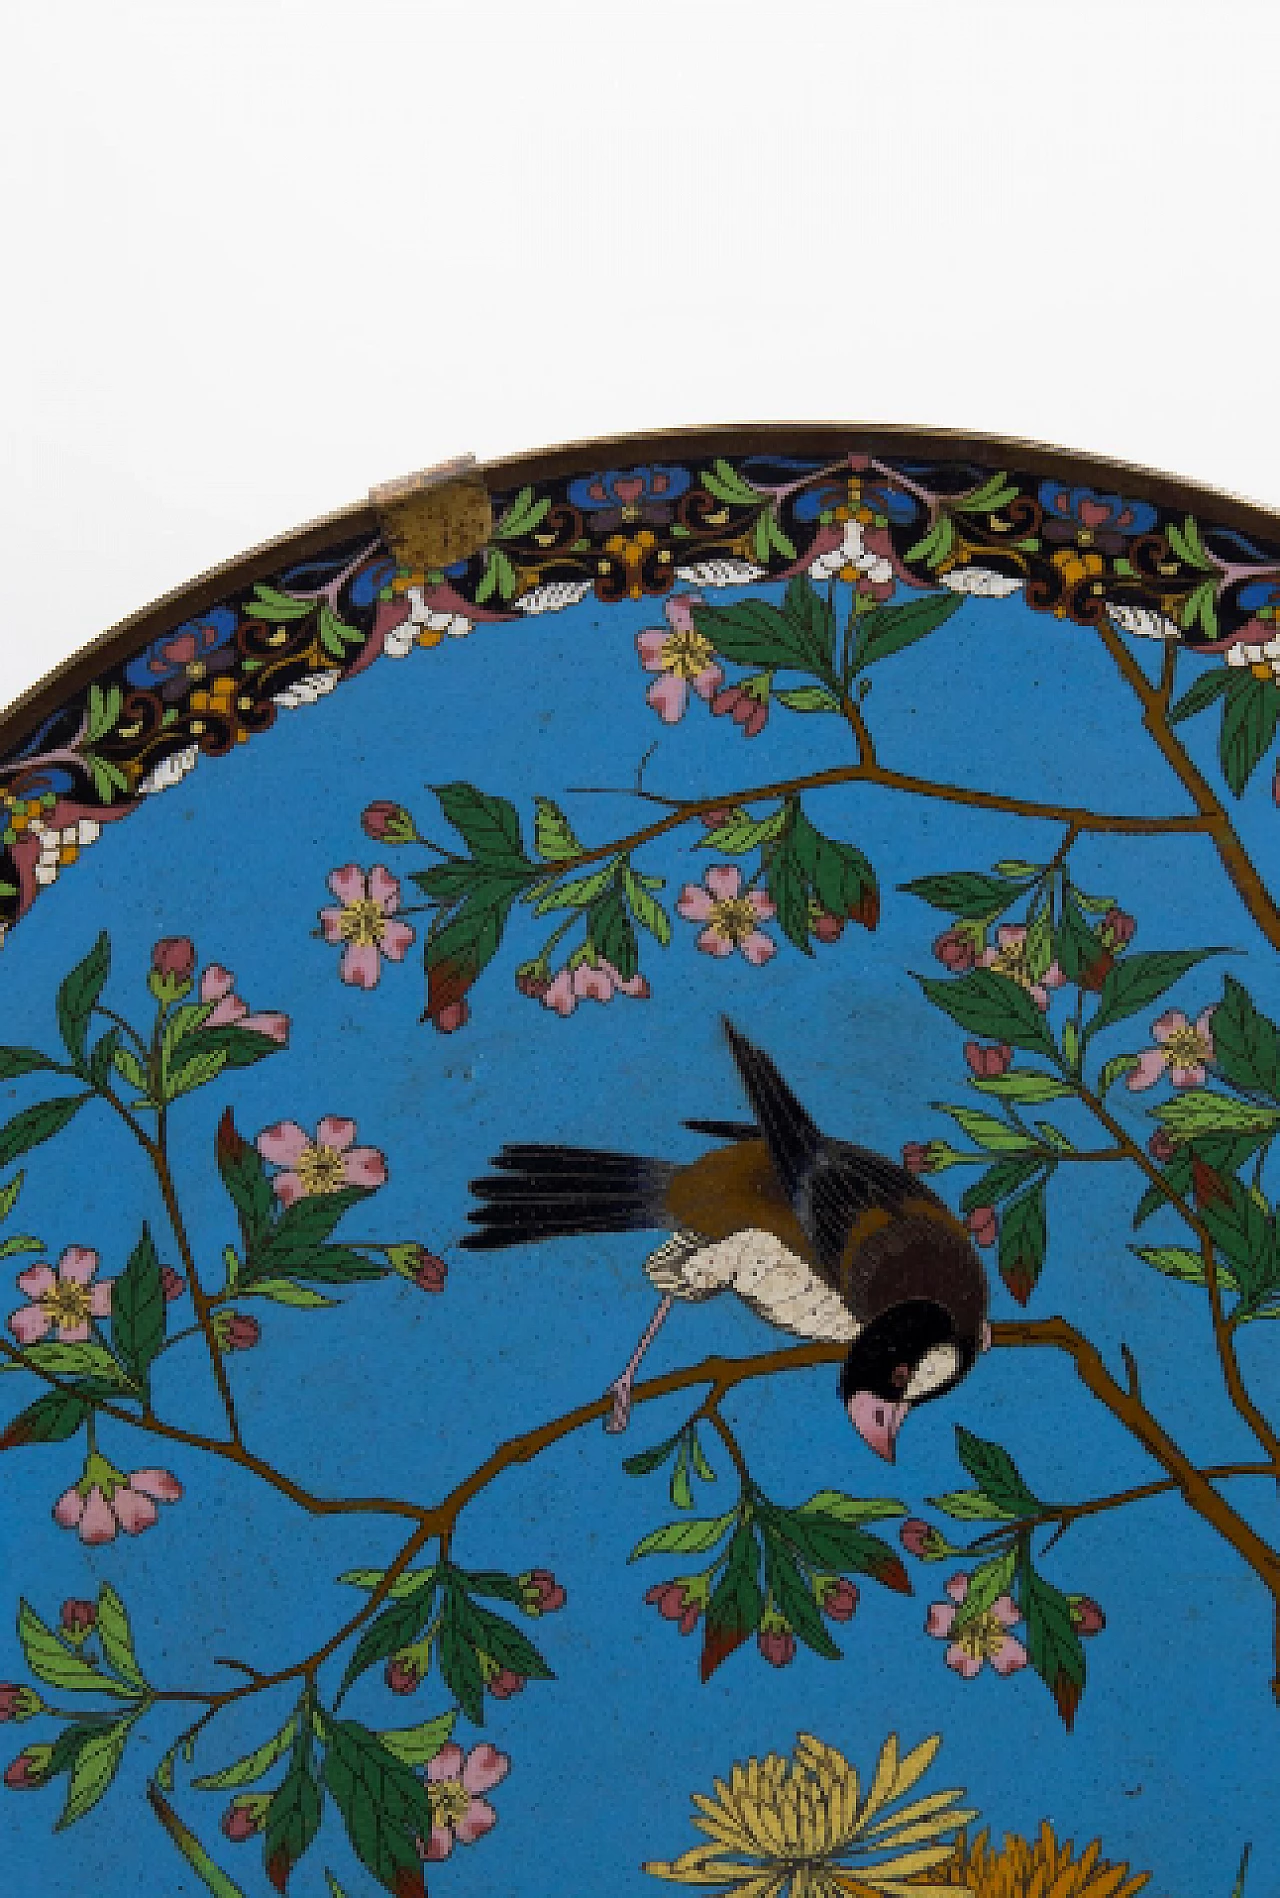 Chinese bronze and cloisonné enamel decorative plate with flowers and bird 2